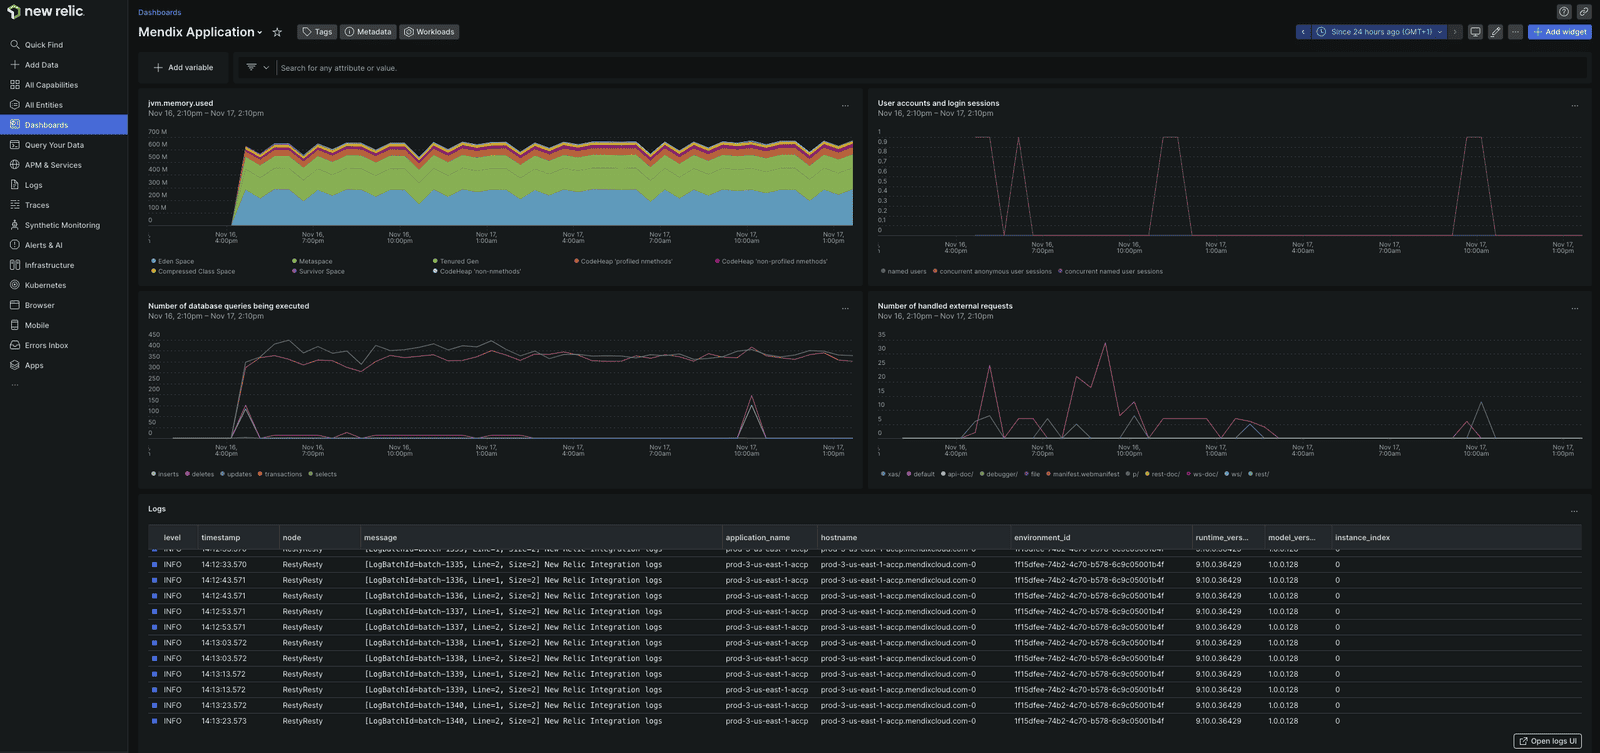 Infrastructure metrics are shown in the New Relic platform